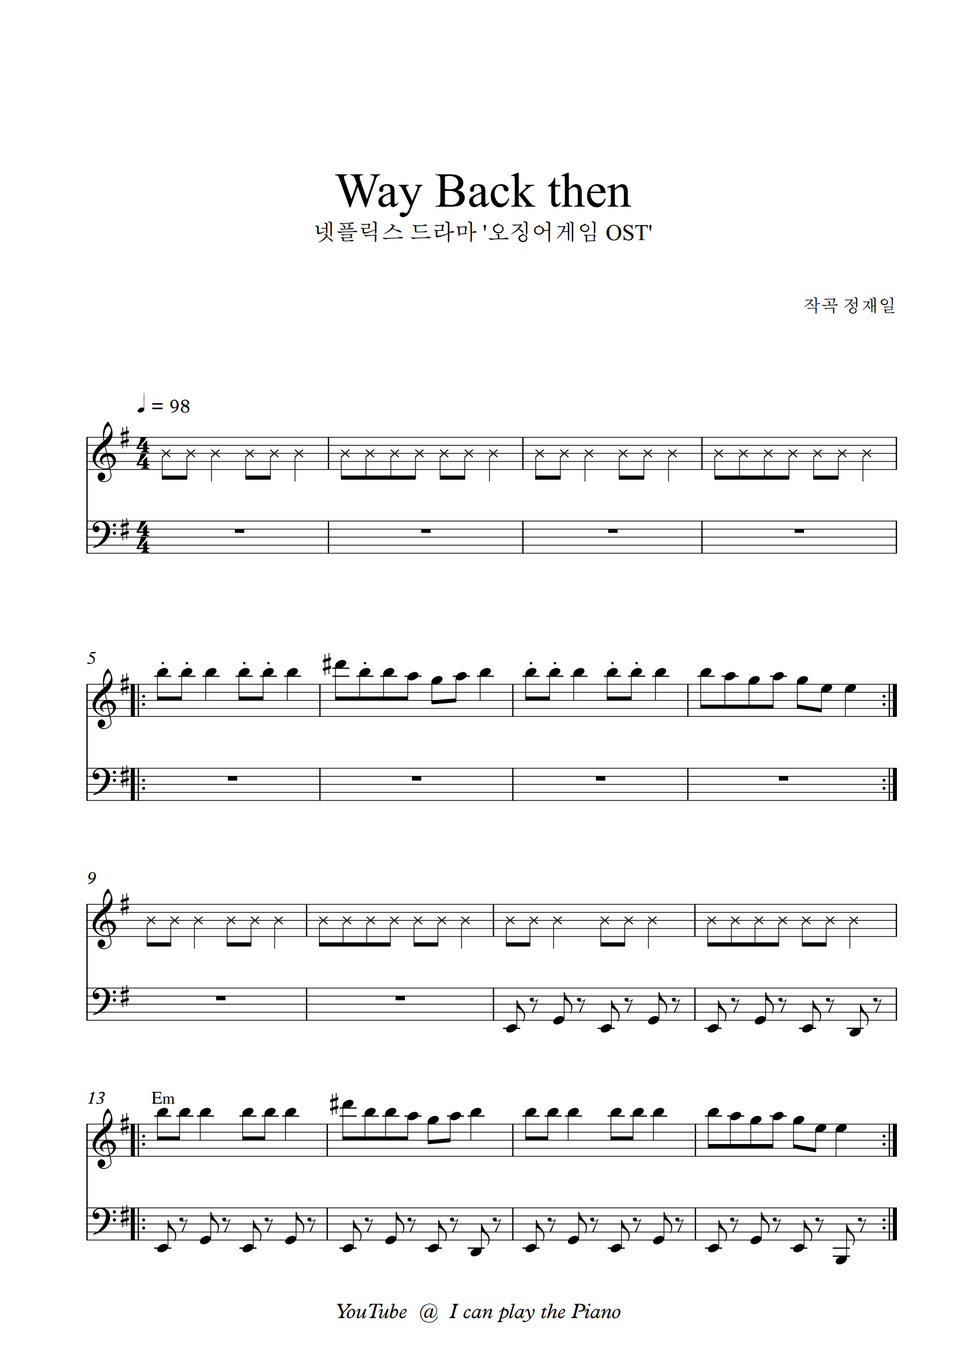 Squid Game OST(오징어 게임 OST ) - Way back then (Easy Piano) by I can play the  Piano Sheet